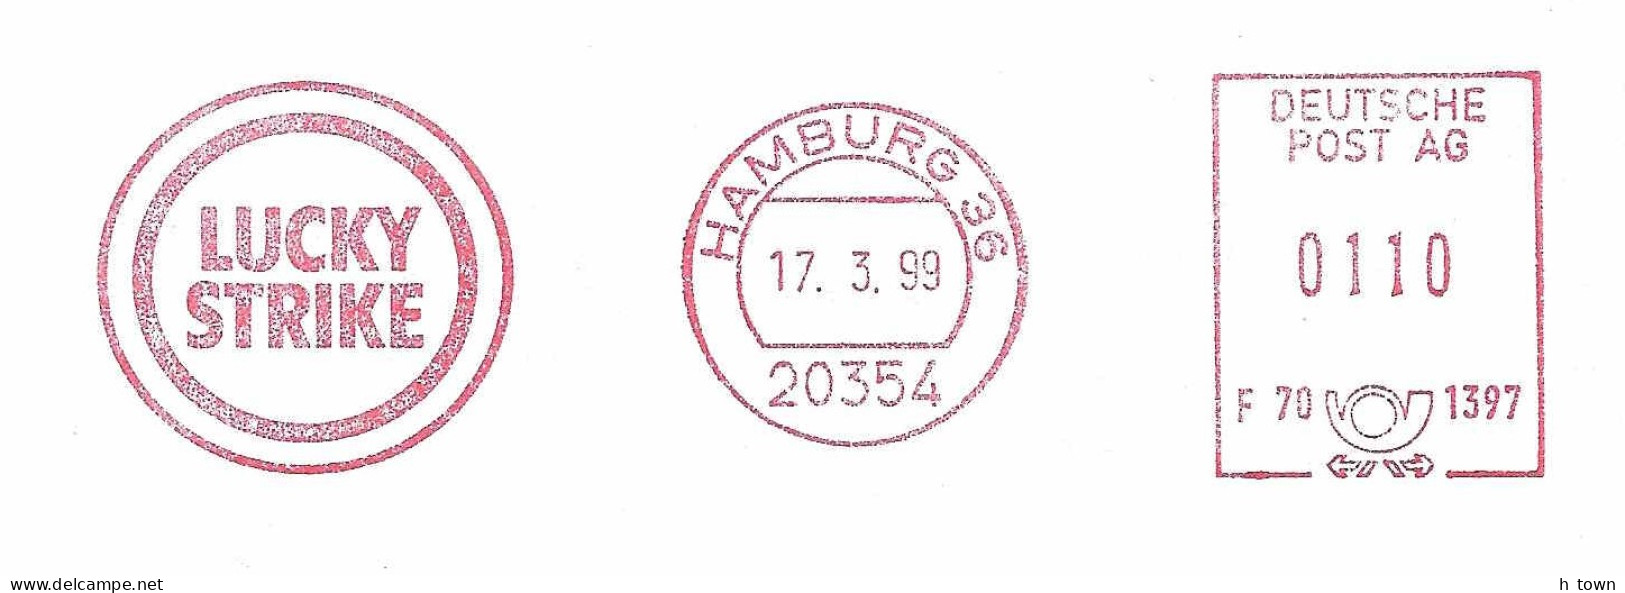 125  Tabac, Cigarette Lucky Strike: Ema D'Allemagne, 1999 - Tobacco Meter Stamp From Hamburg, Germany - Droga